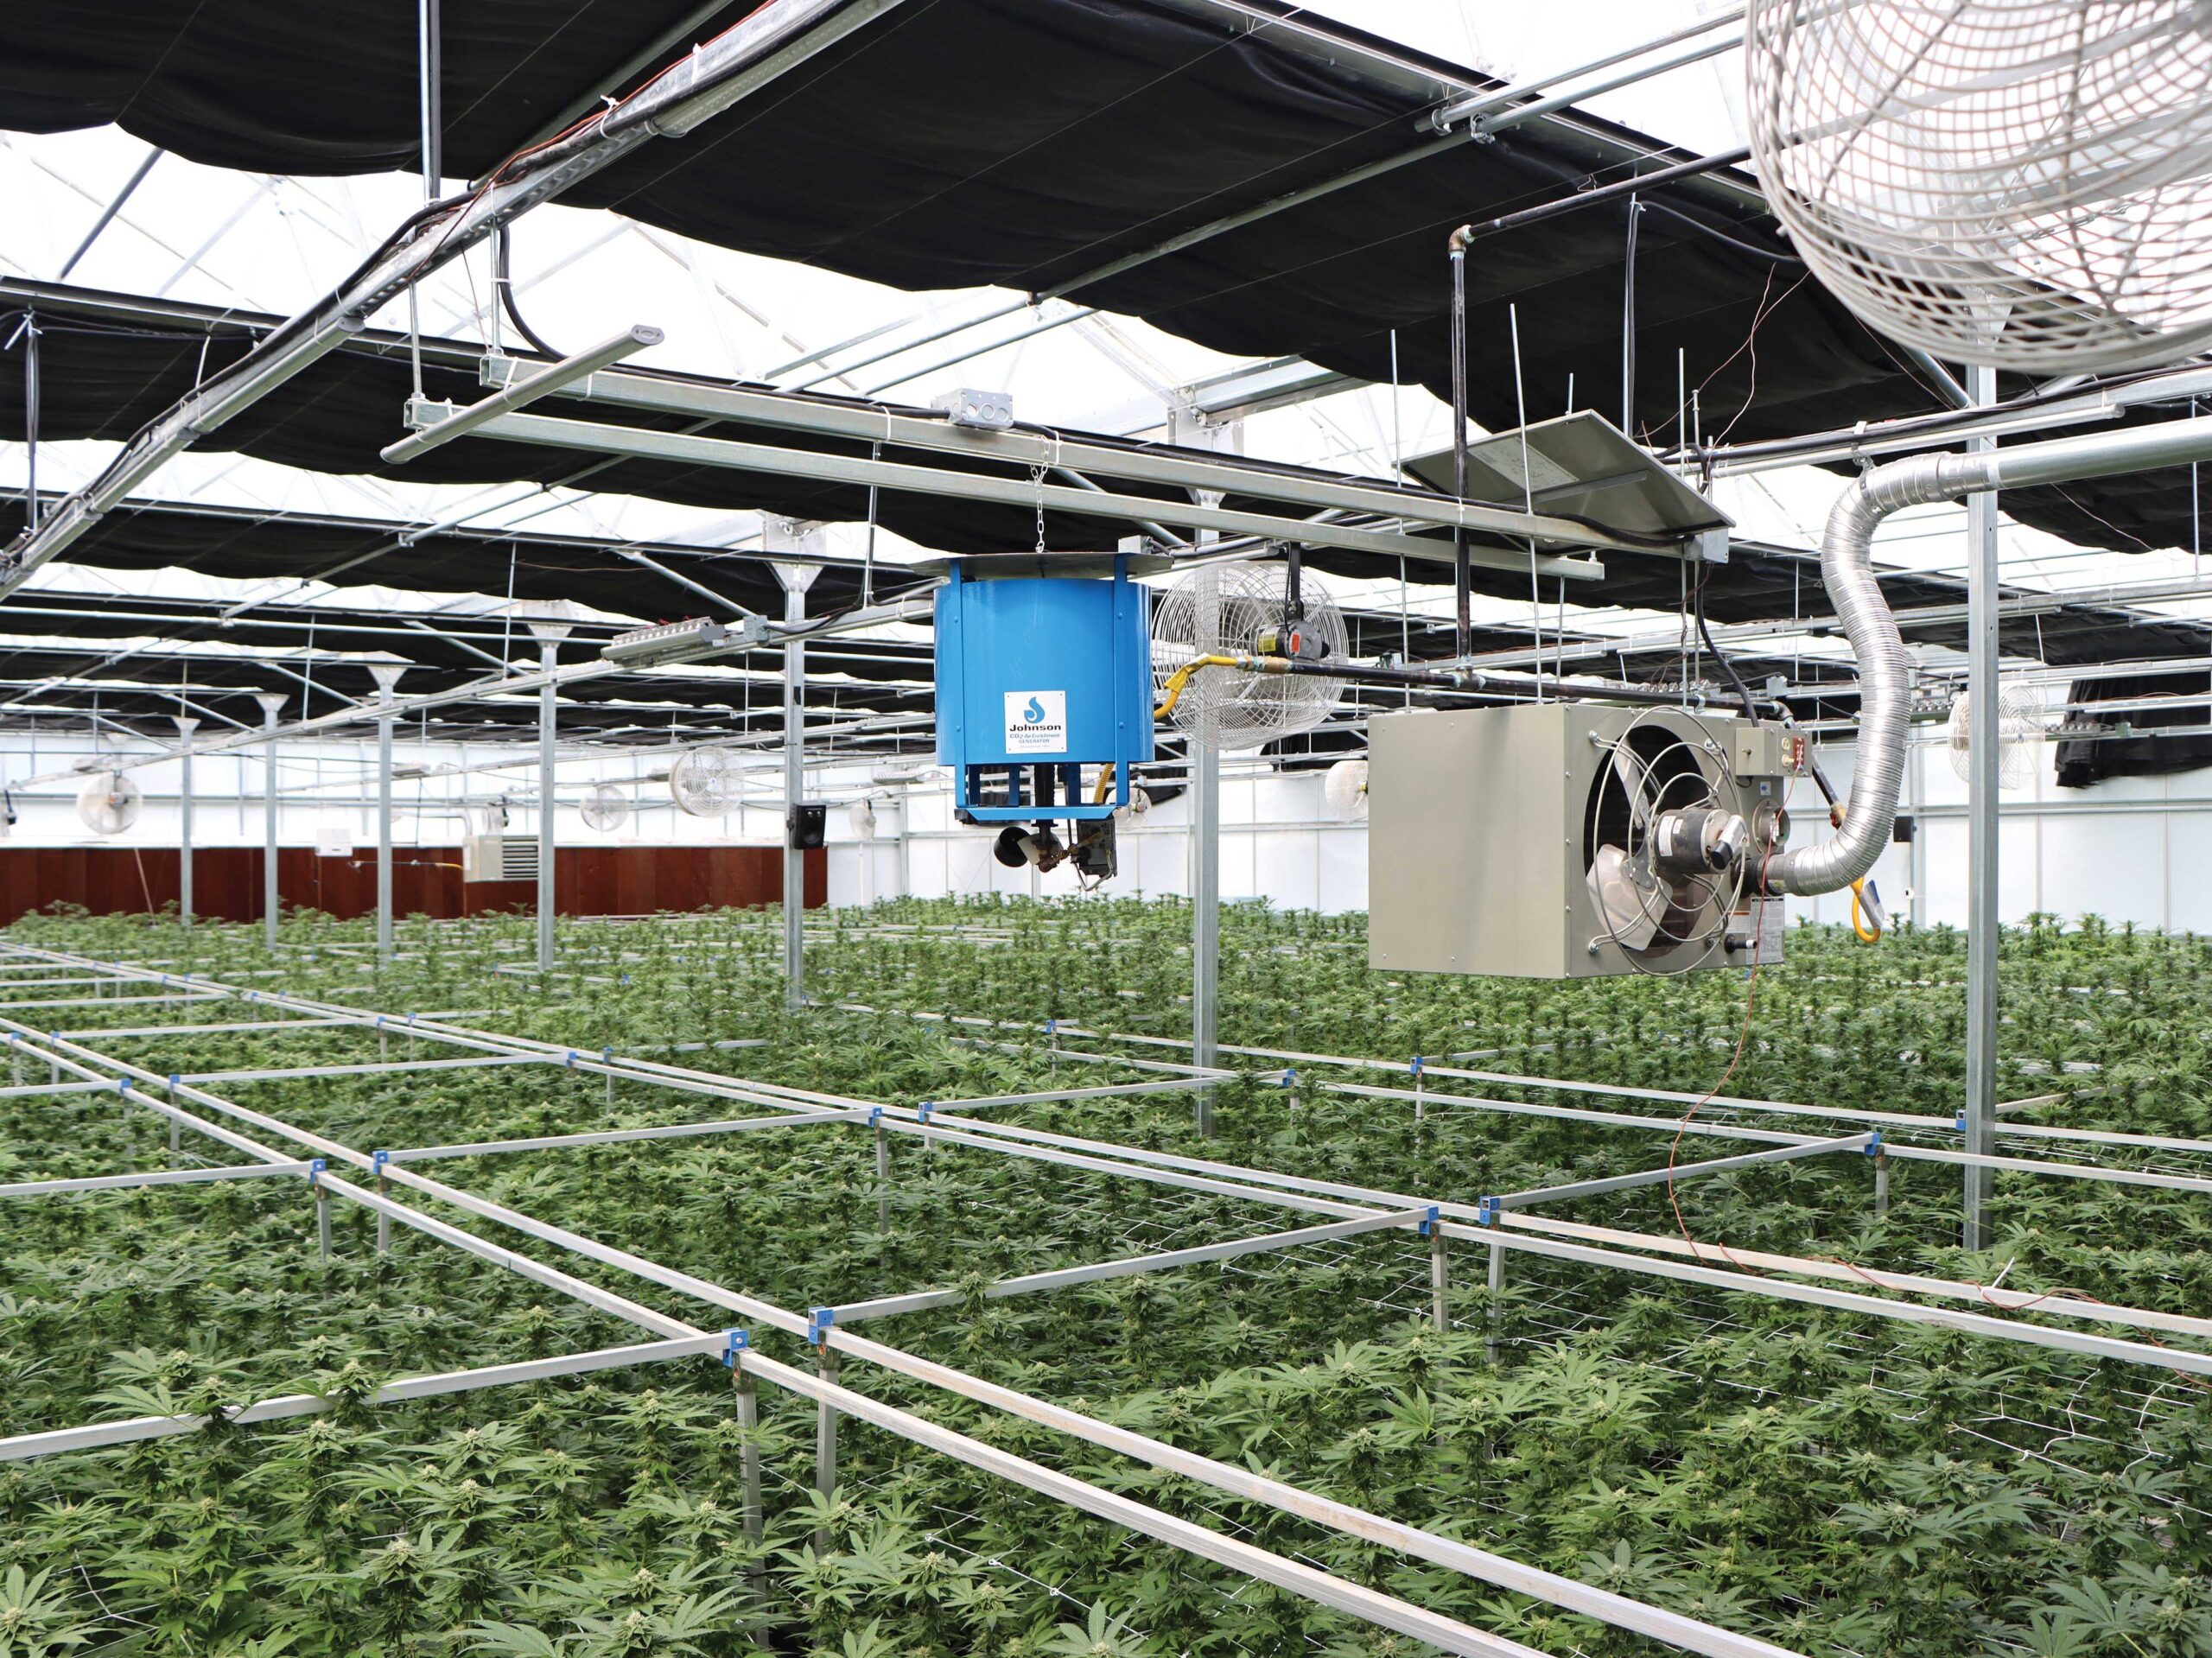 co2 enrichment system inside cannabis greenhouse